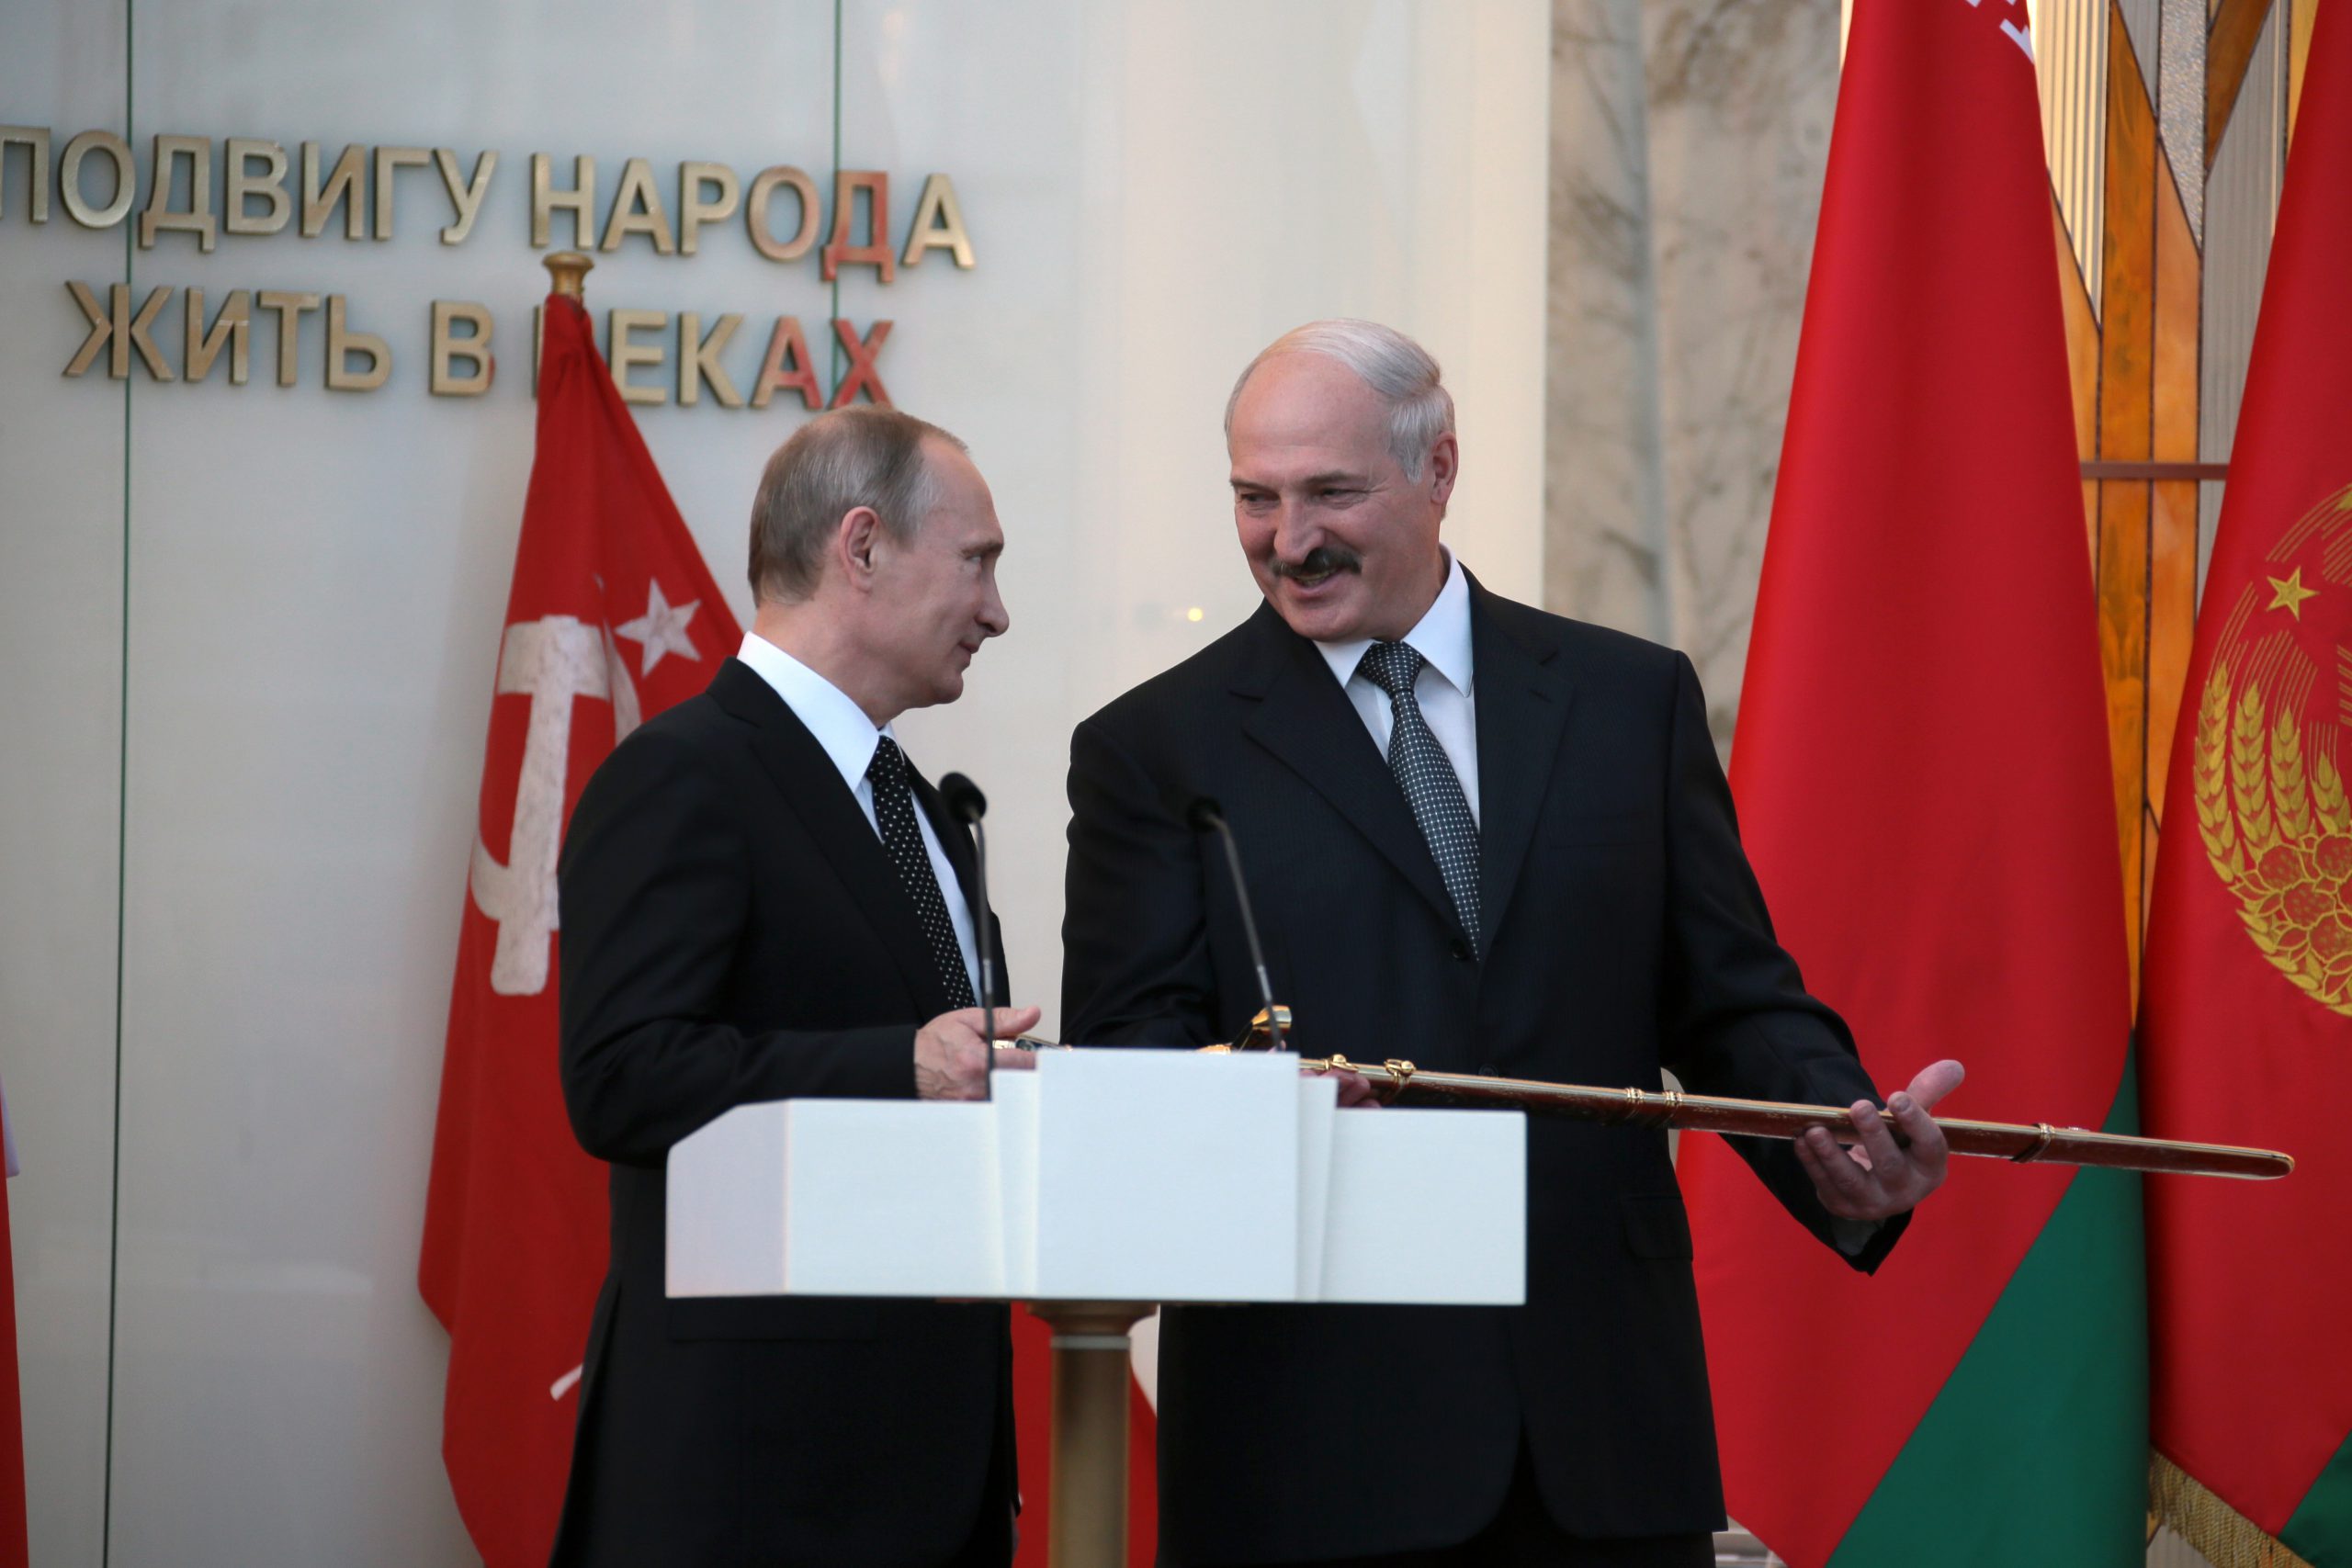 Minsk has relaxed tension with the Kremlin, but conflict potential in Russo-Belarusian relations retains